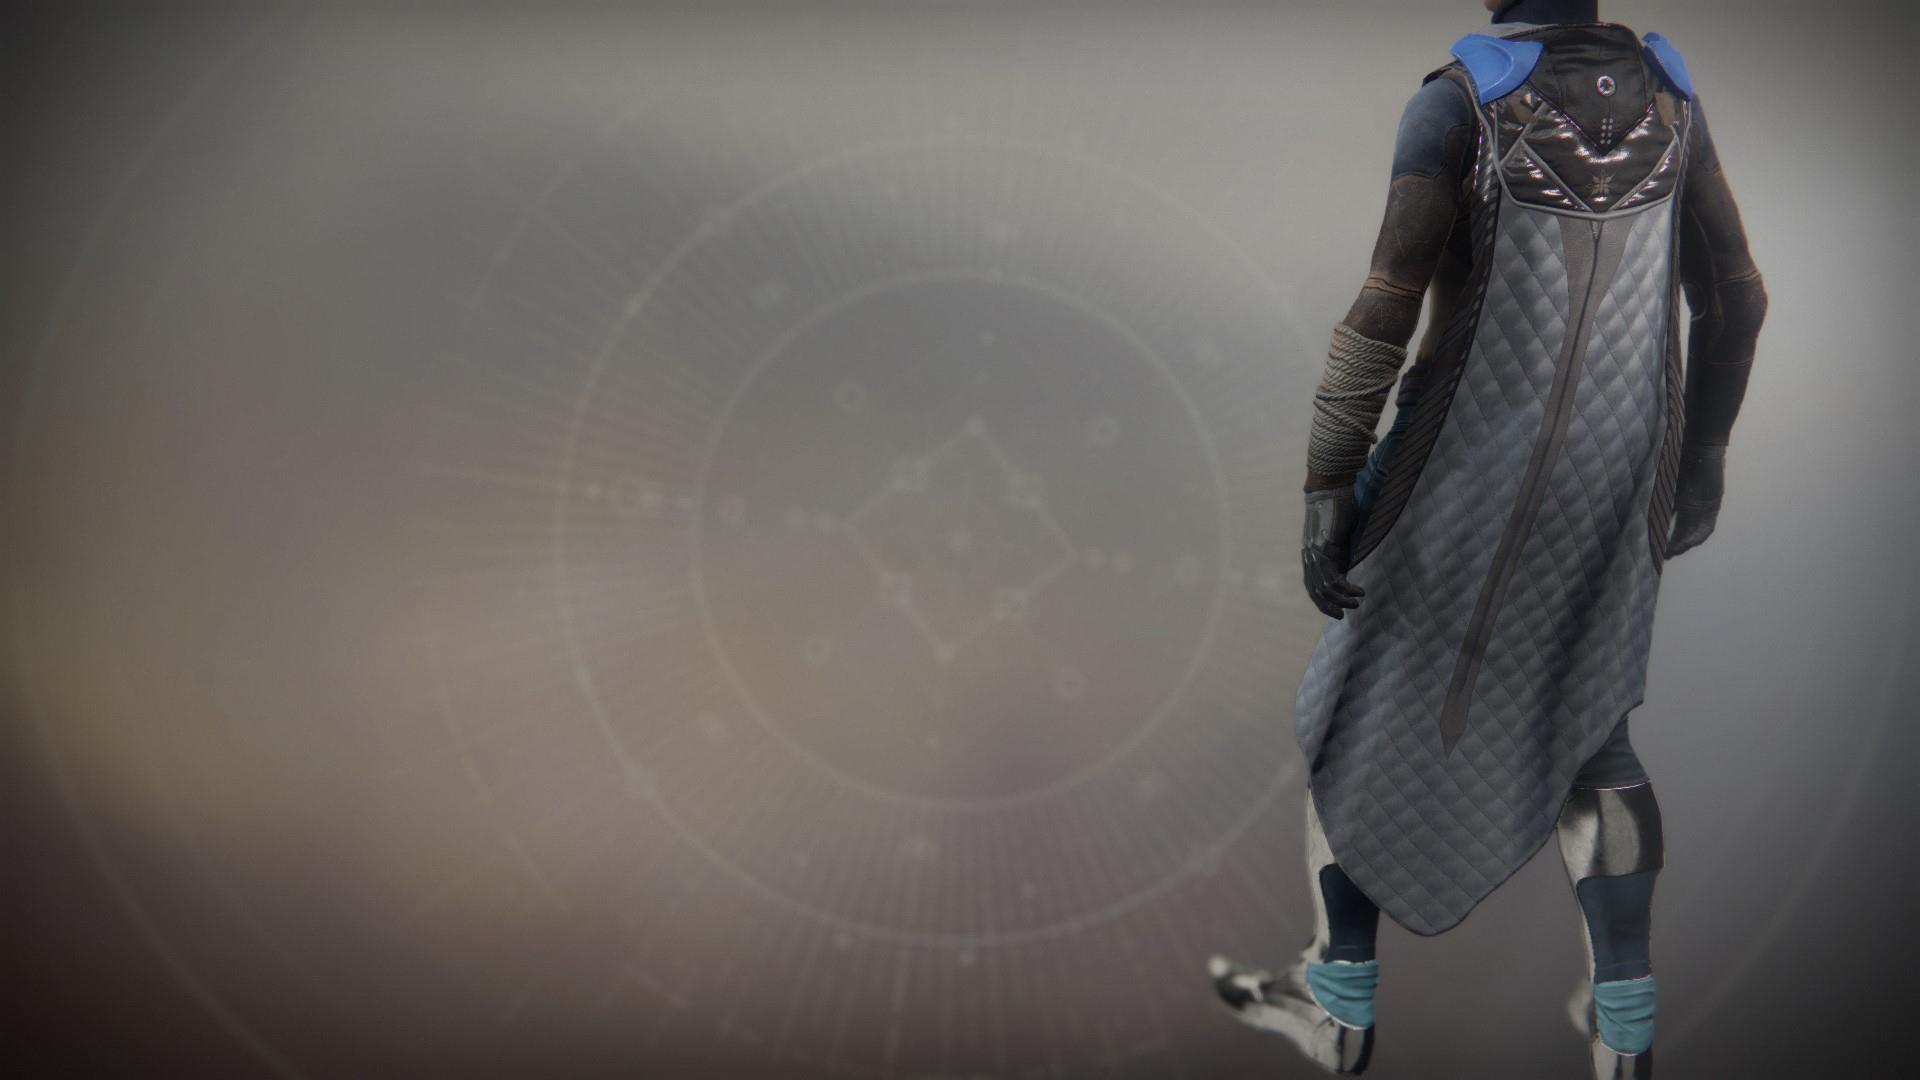 An in-game render of the Warm Winter Cloak.